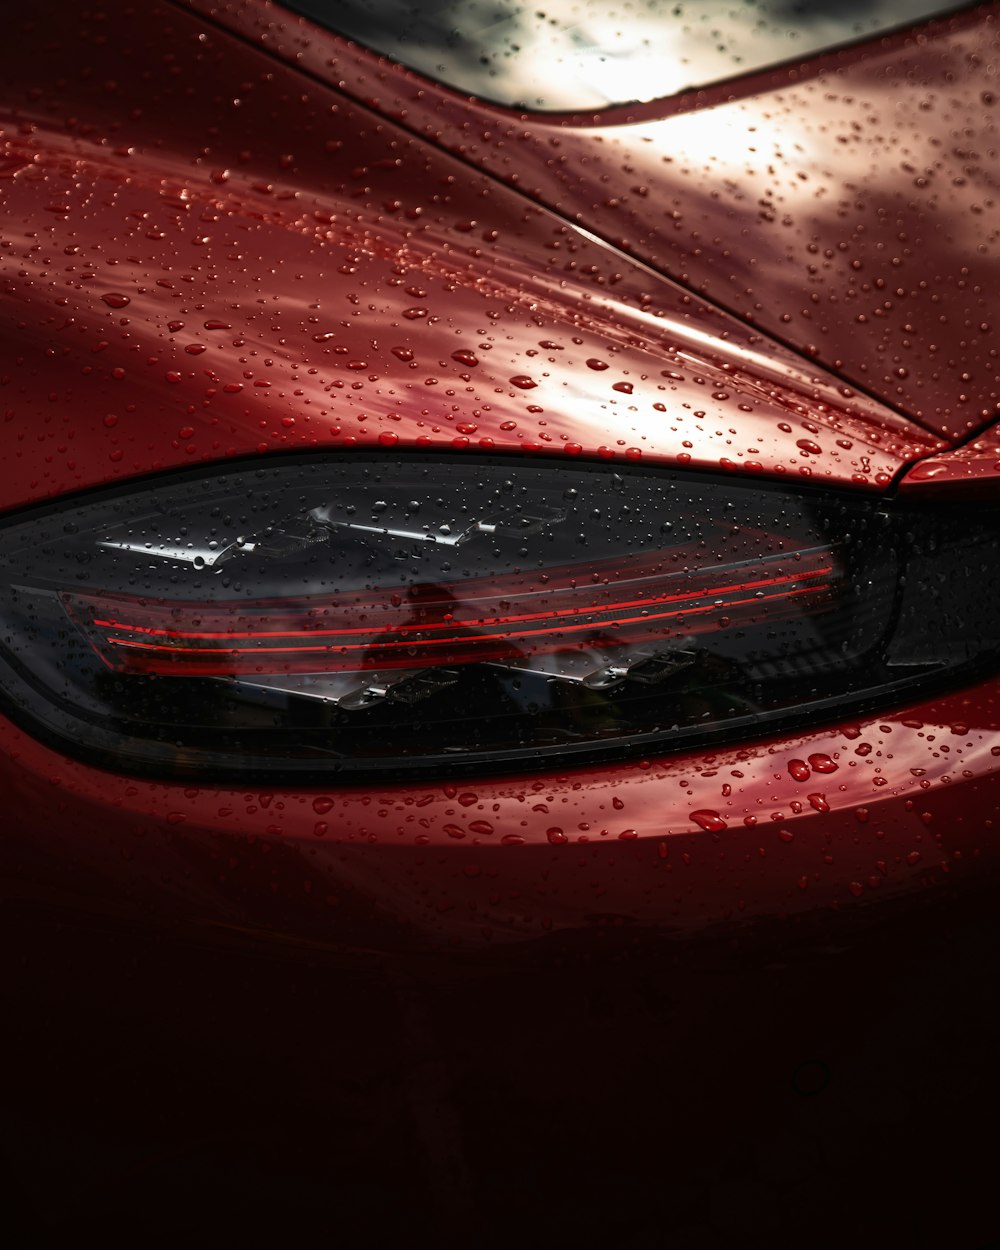 a close up of a red car with rain drops on it